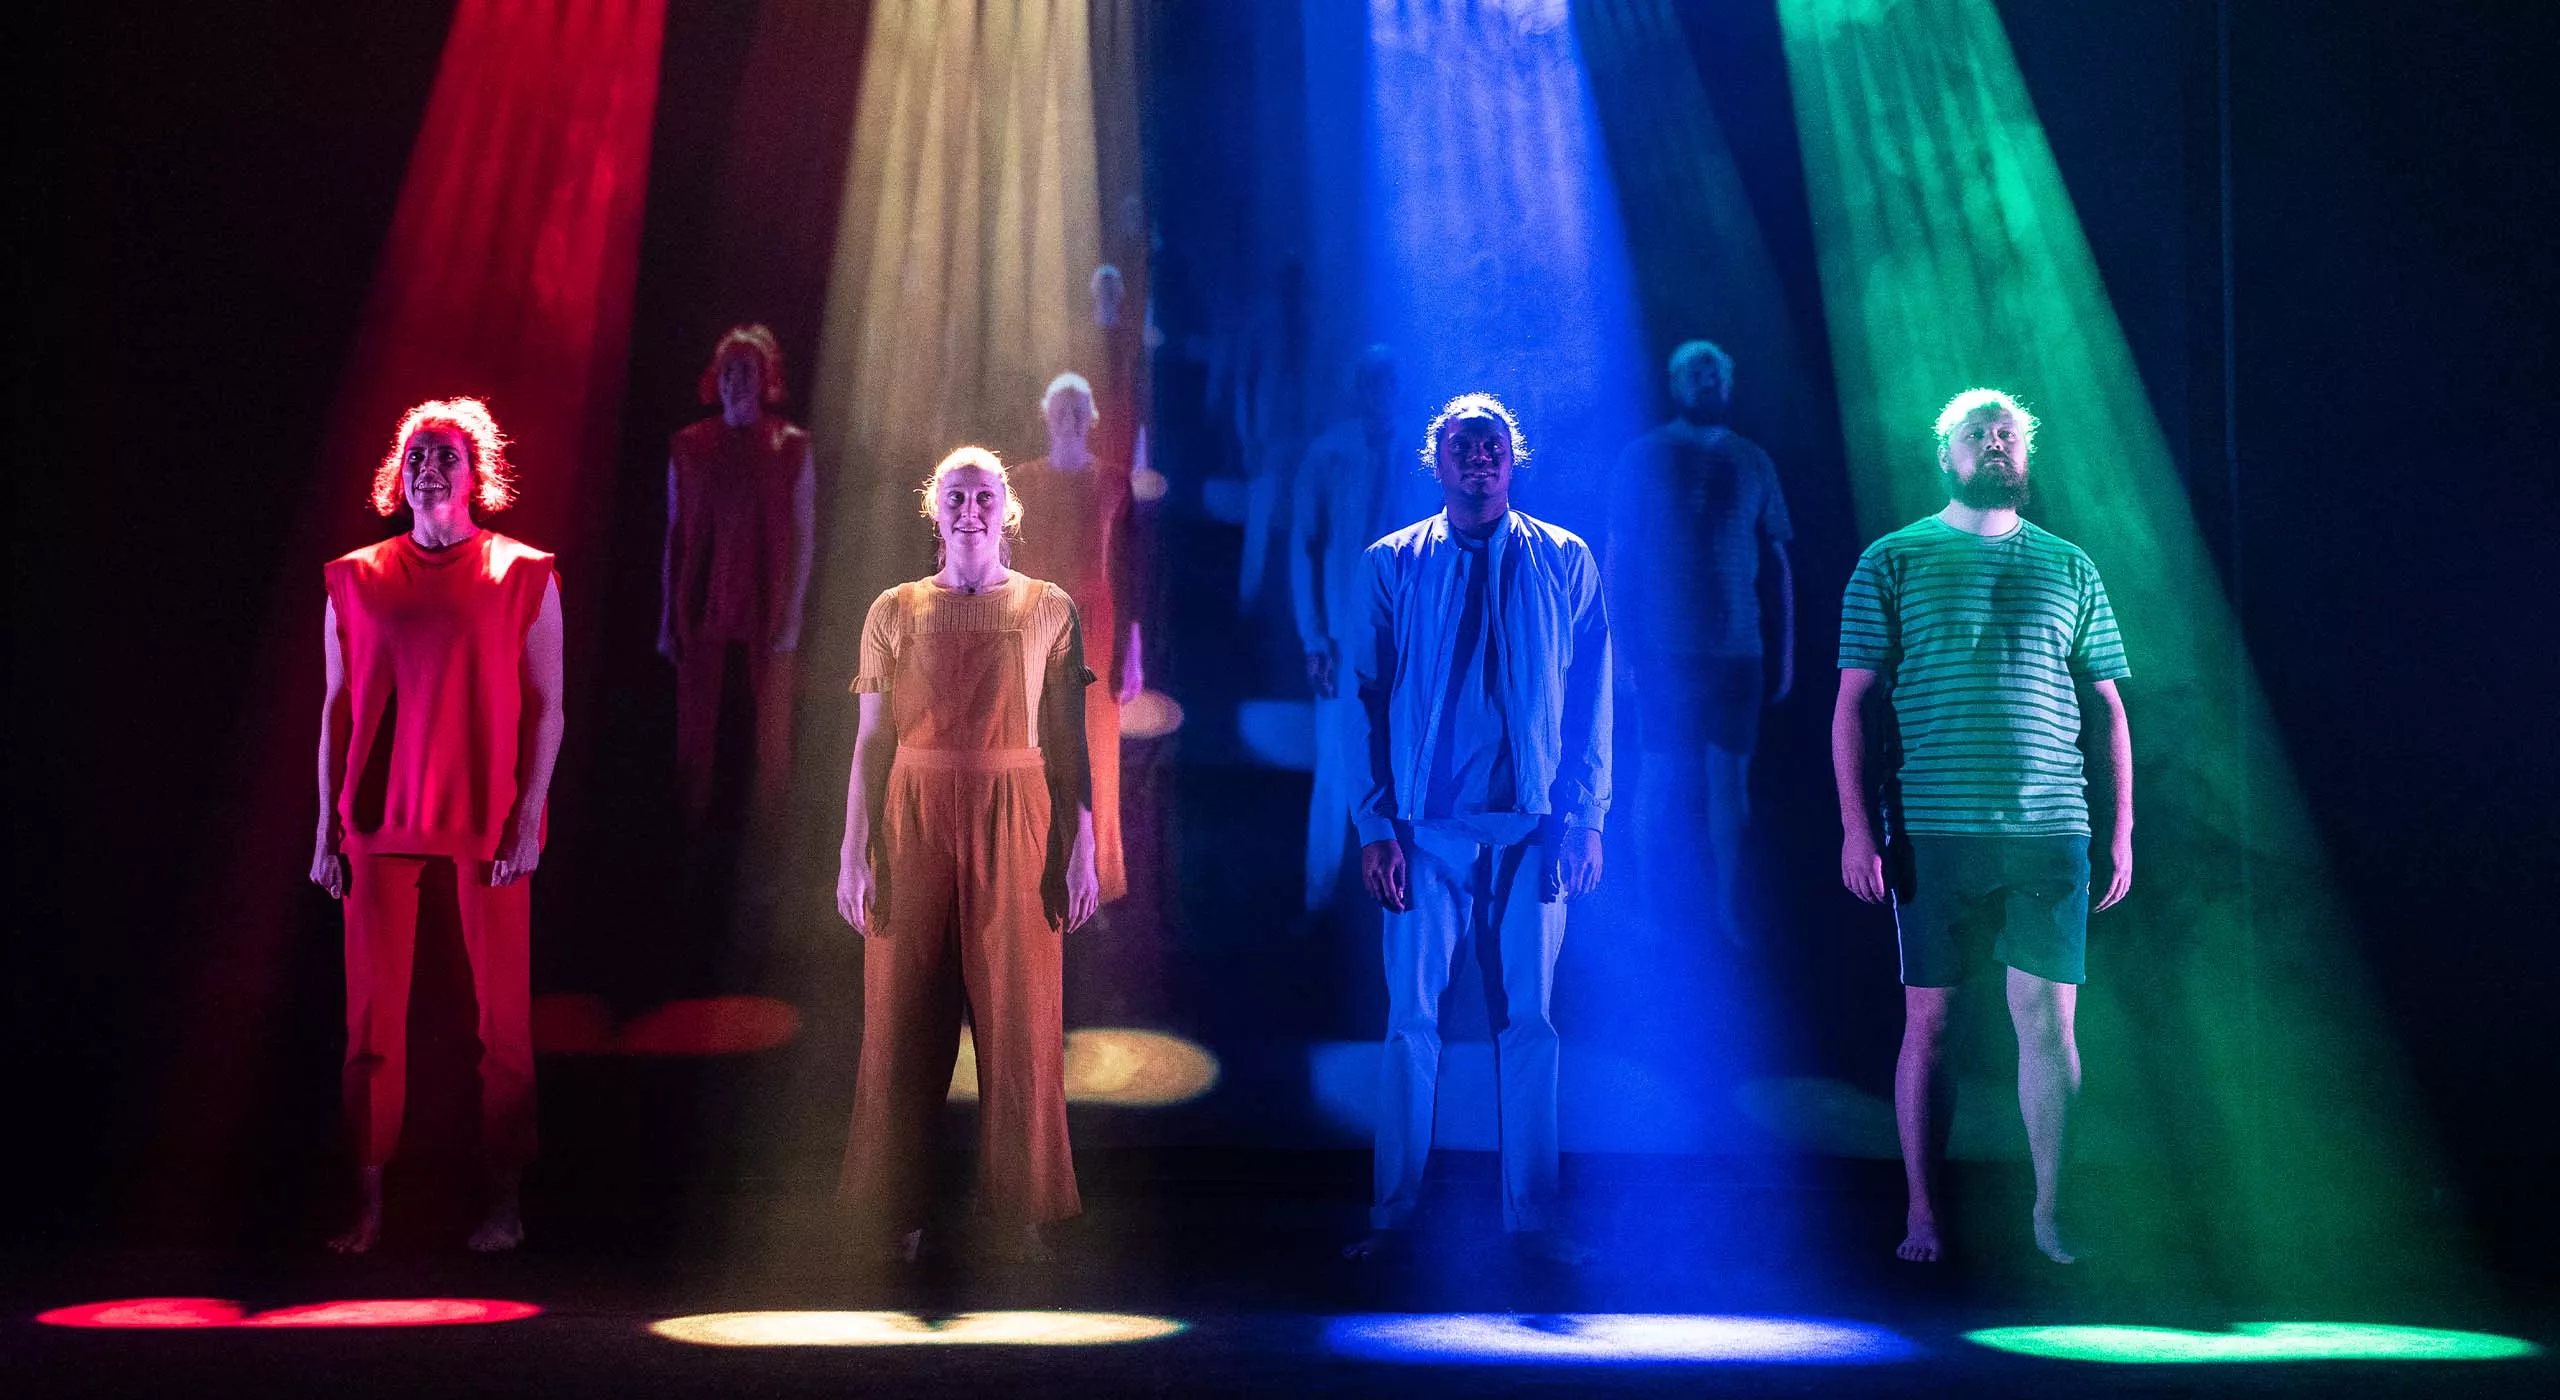 Four people wearing different prime colours. Their arms are out to the side, with finger splayed. They appear to be yelling. They are all stacked up behind one another and coloured lights are projected in the background.